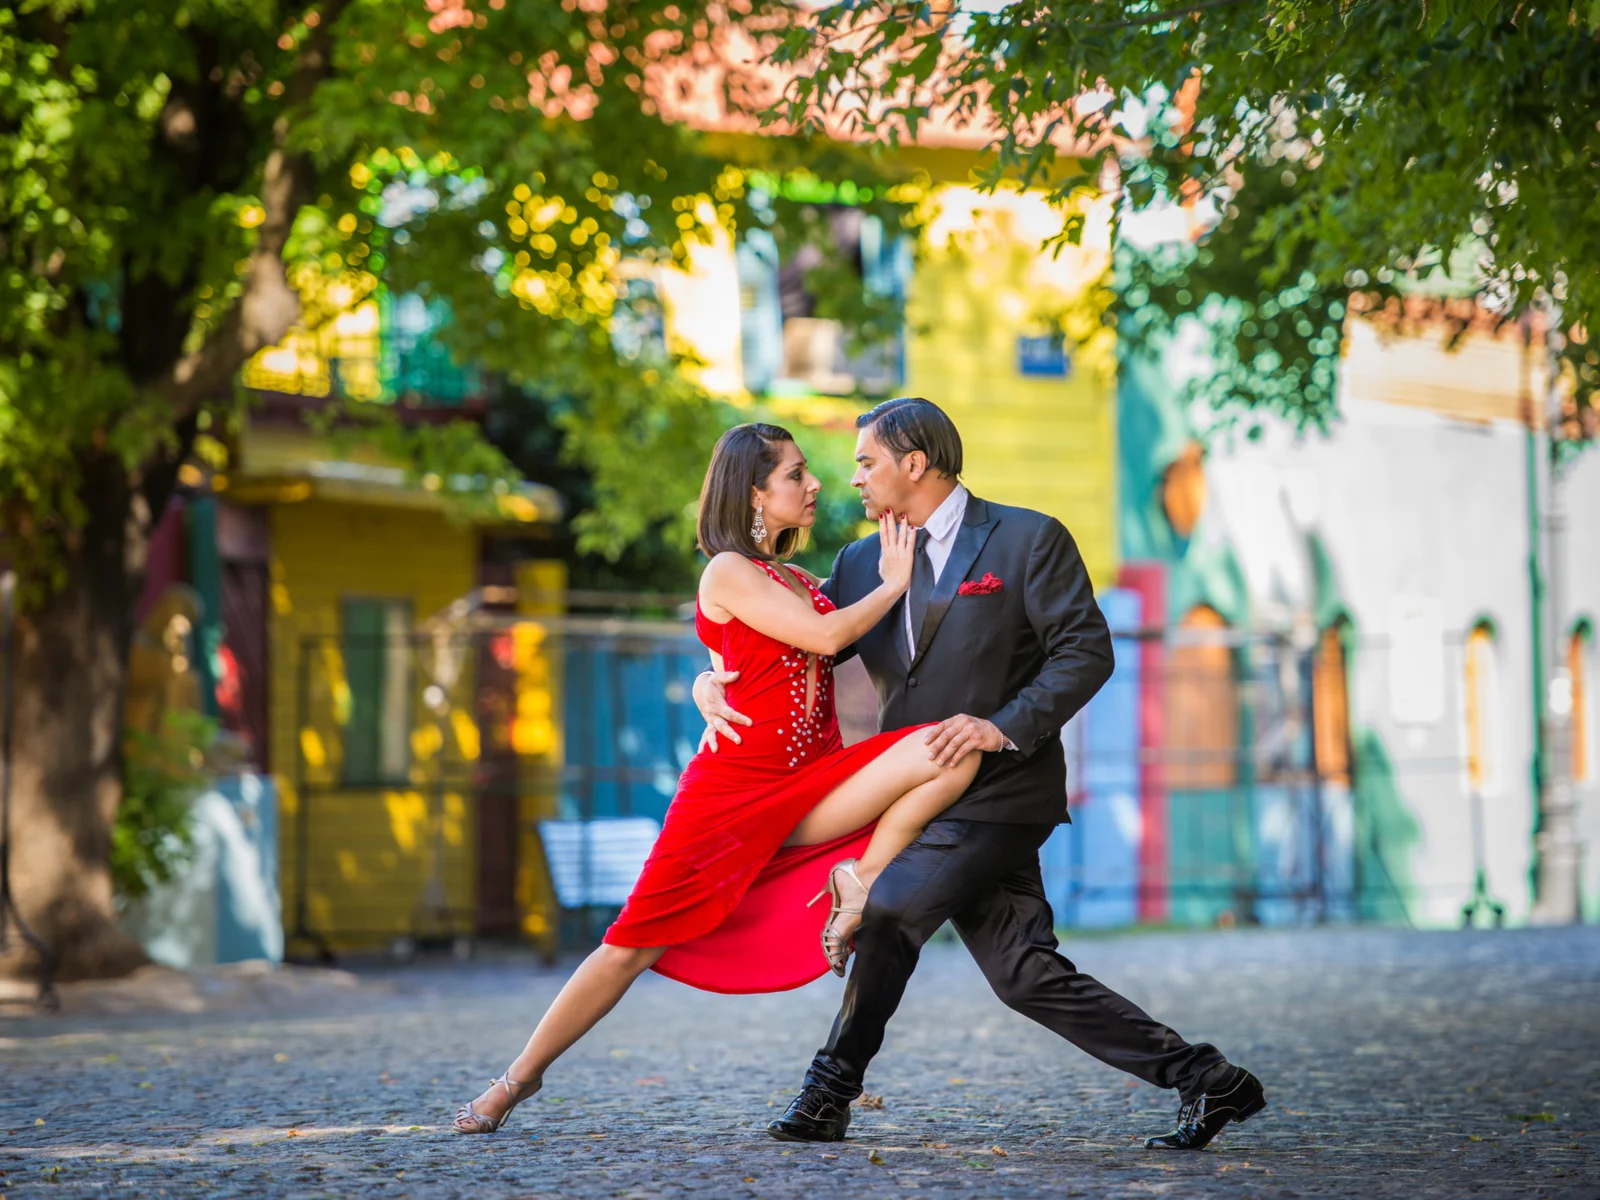 Man and woman doing the tango during the best time to visit Argentina